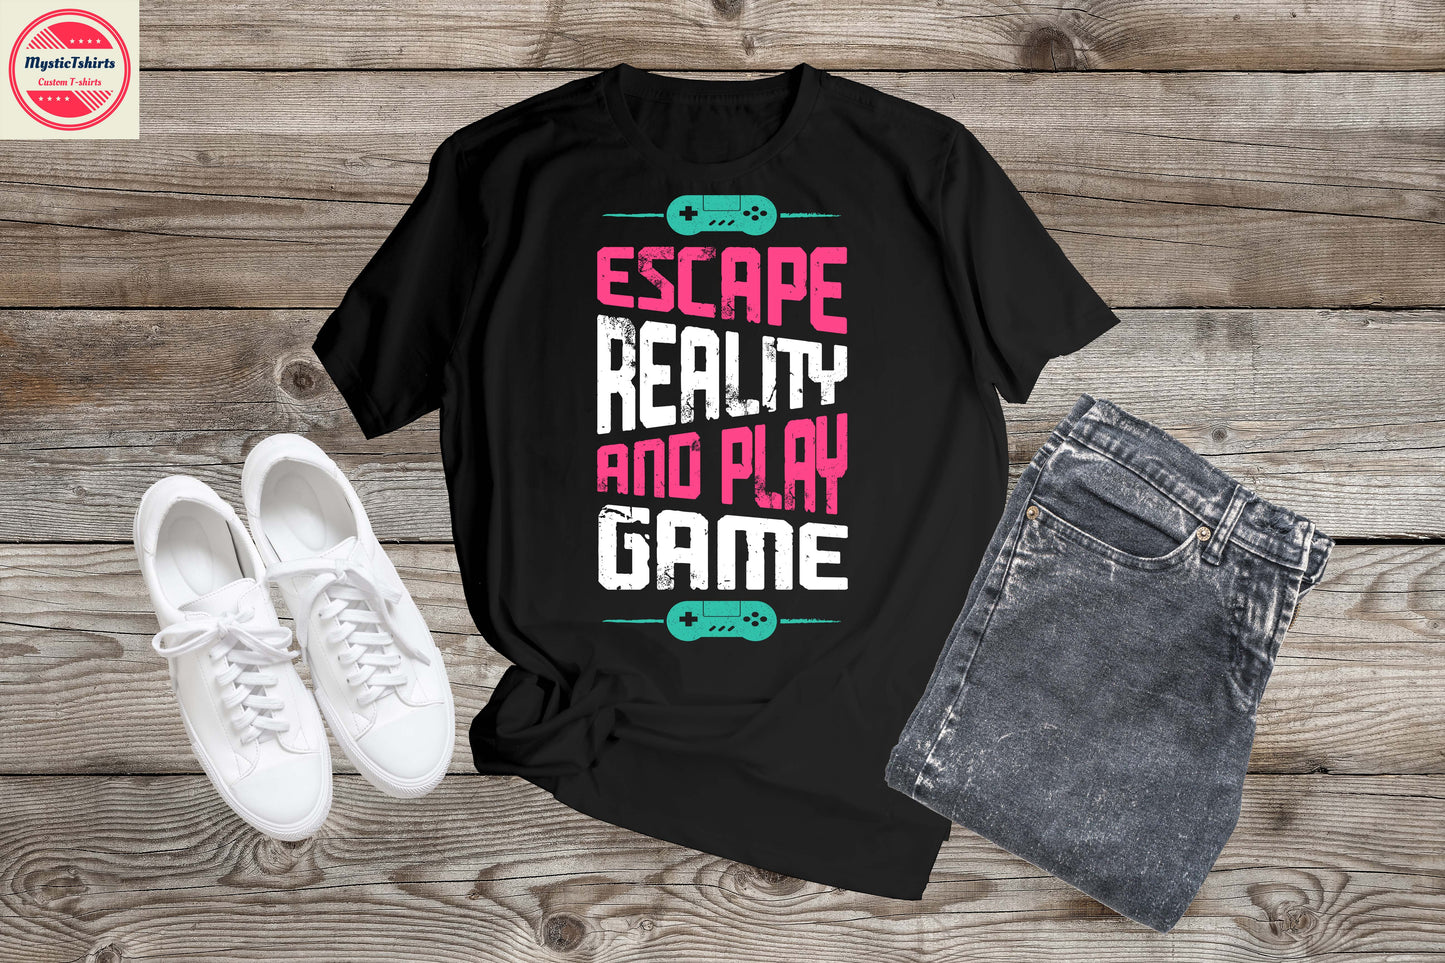 138. ESCAPE REALITY AND PLAY GAME, Custom Made Shirt, Personalized T-Shirt, Custom Text, Make Your Own Shirt, Custom Tee